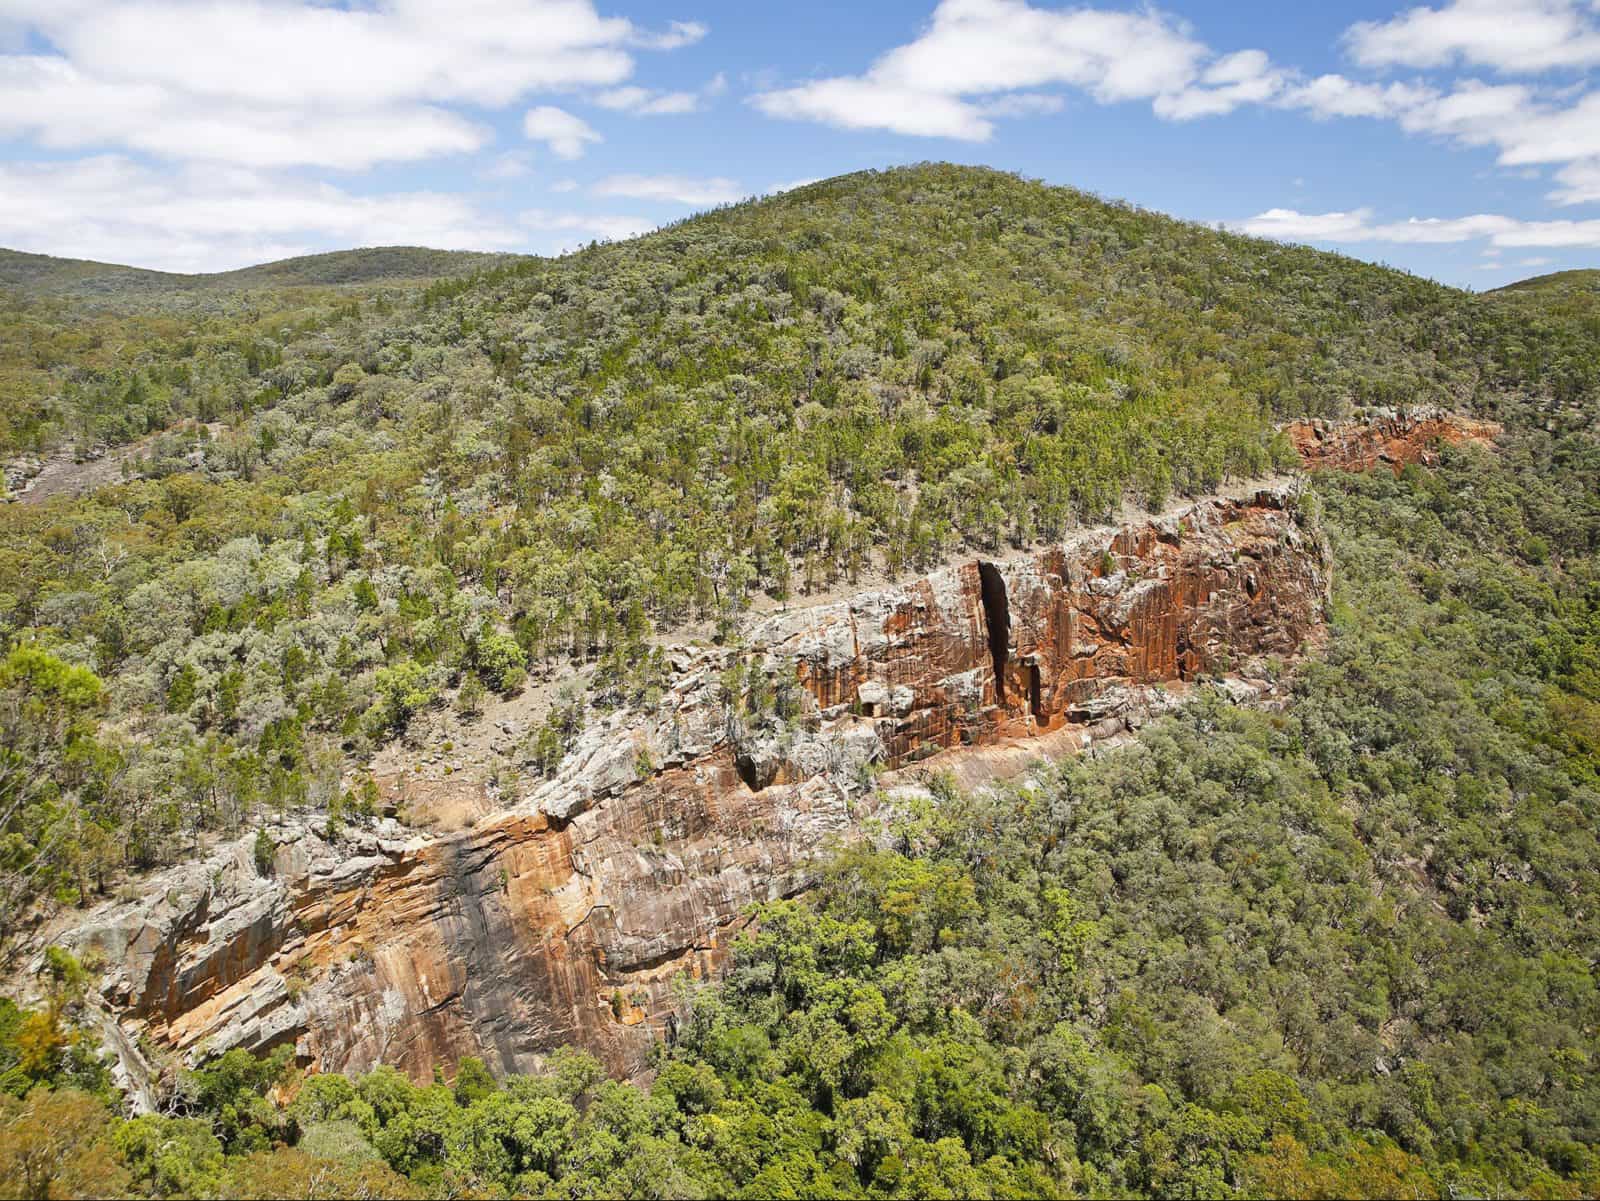 View of gorge and red, treeless cliff faces.